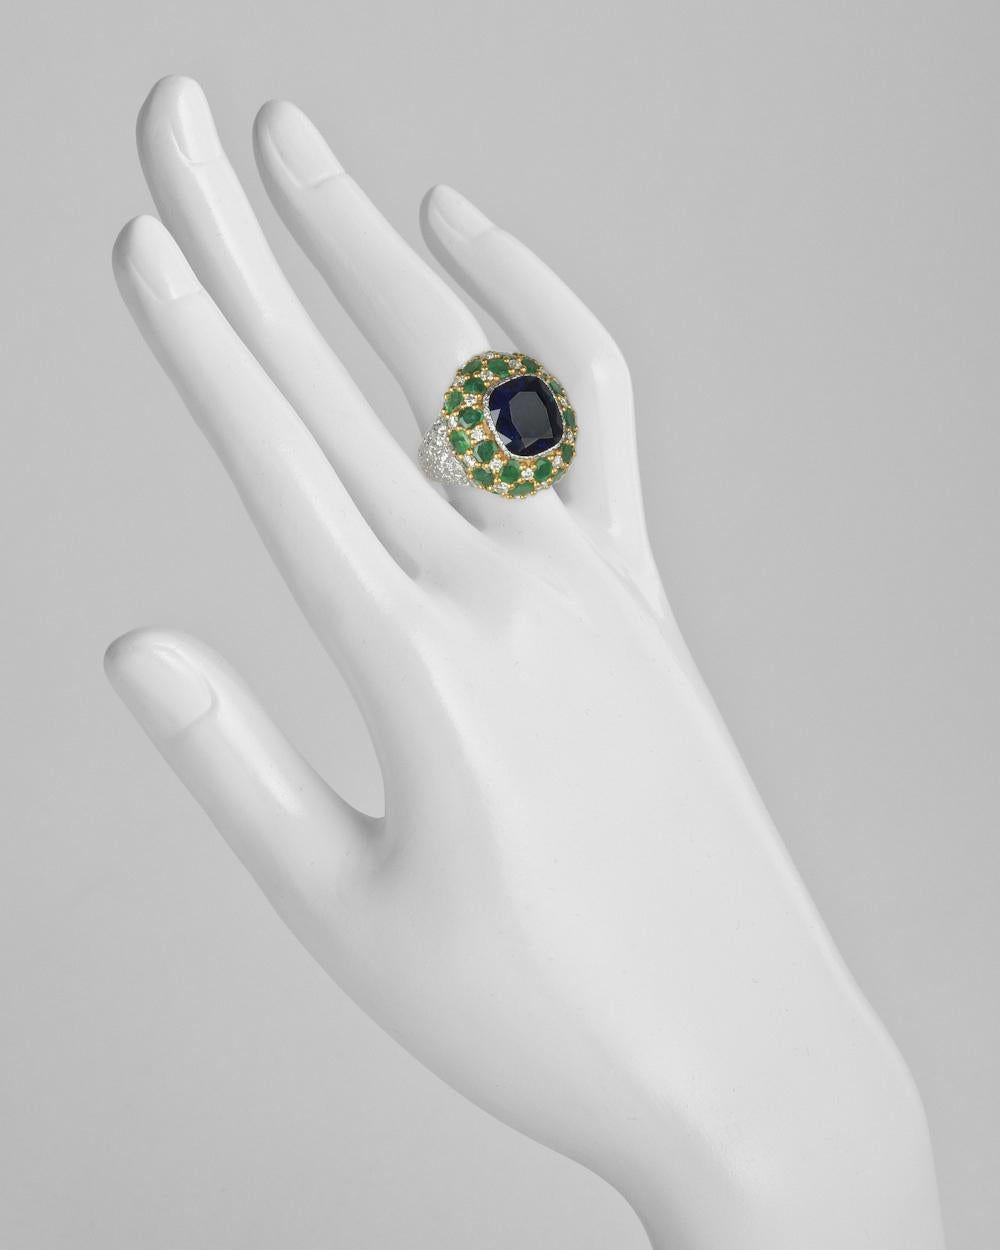 Cocktail ring, centering a cushion-shaped natural sapphire within a bombé-style mount of pavé-set emeralds and diamonds, in a textured 18k white gold setting with 18k yellow gold, signed Buccellati.
 
Sapphire weighing ~8.00 carats
Emeralds weighing